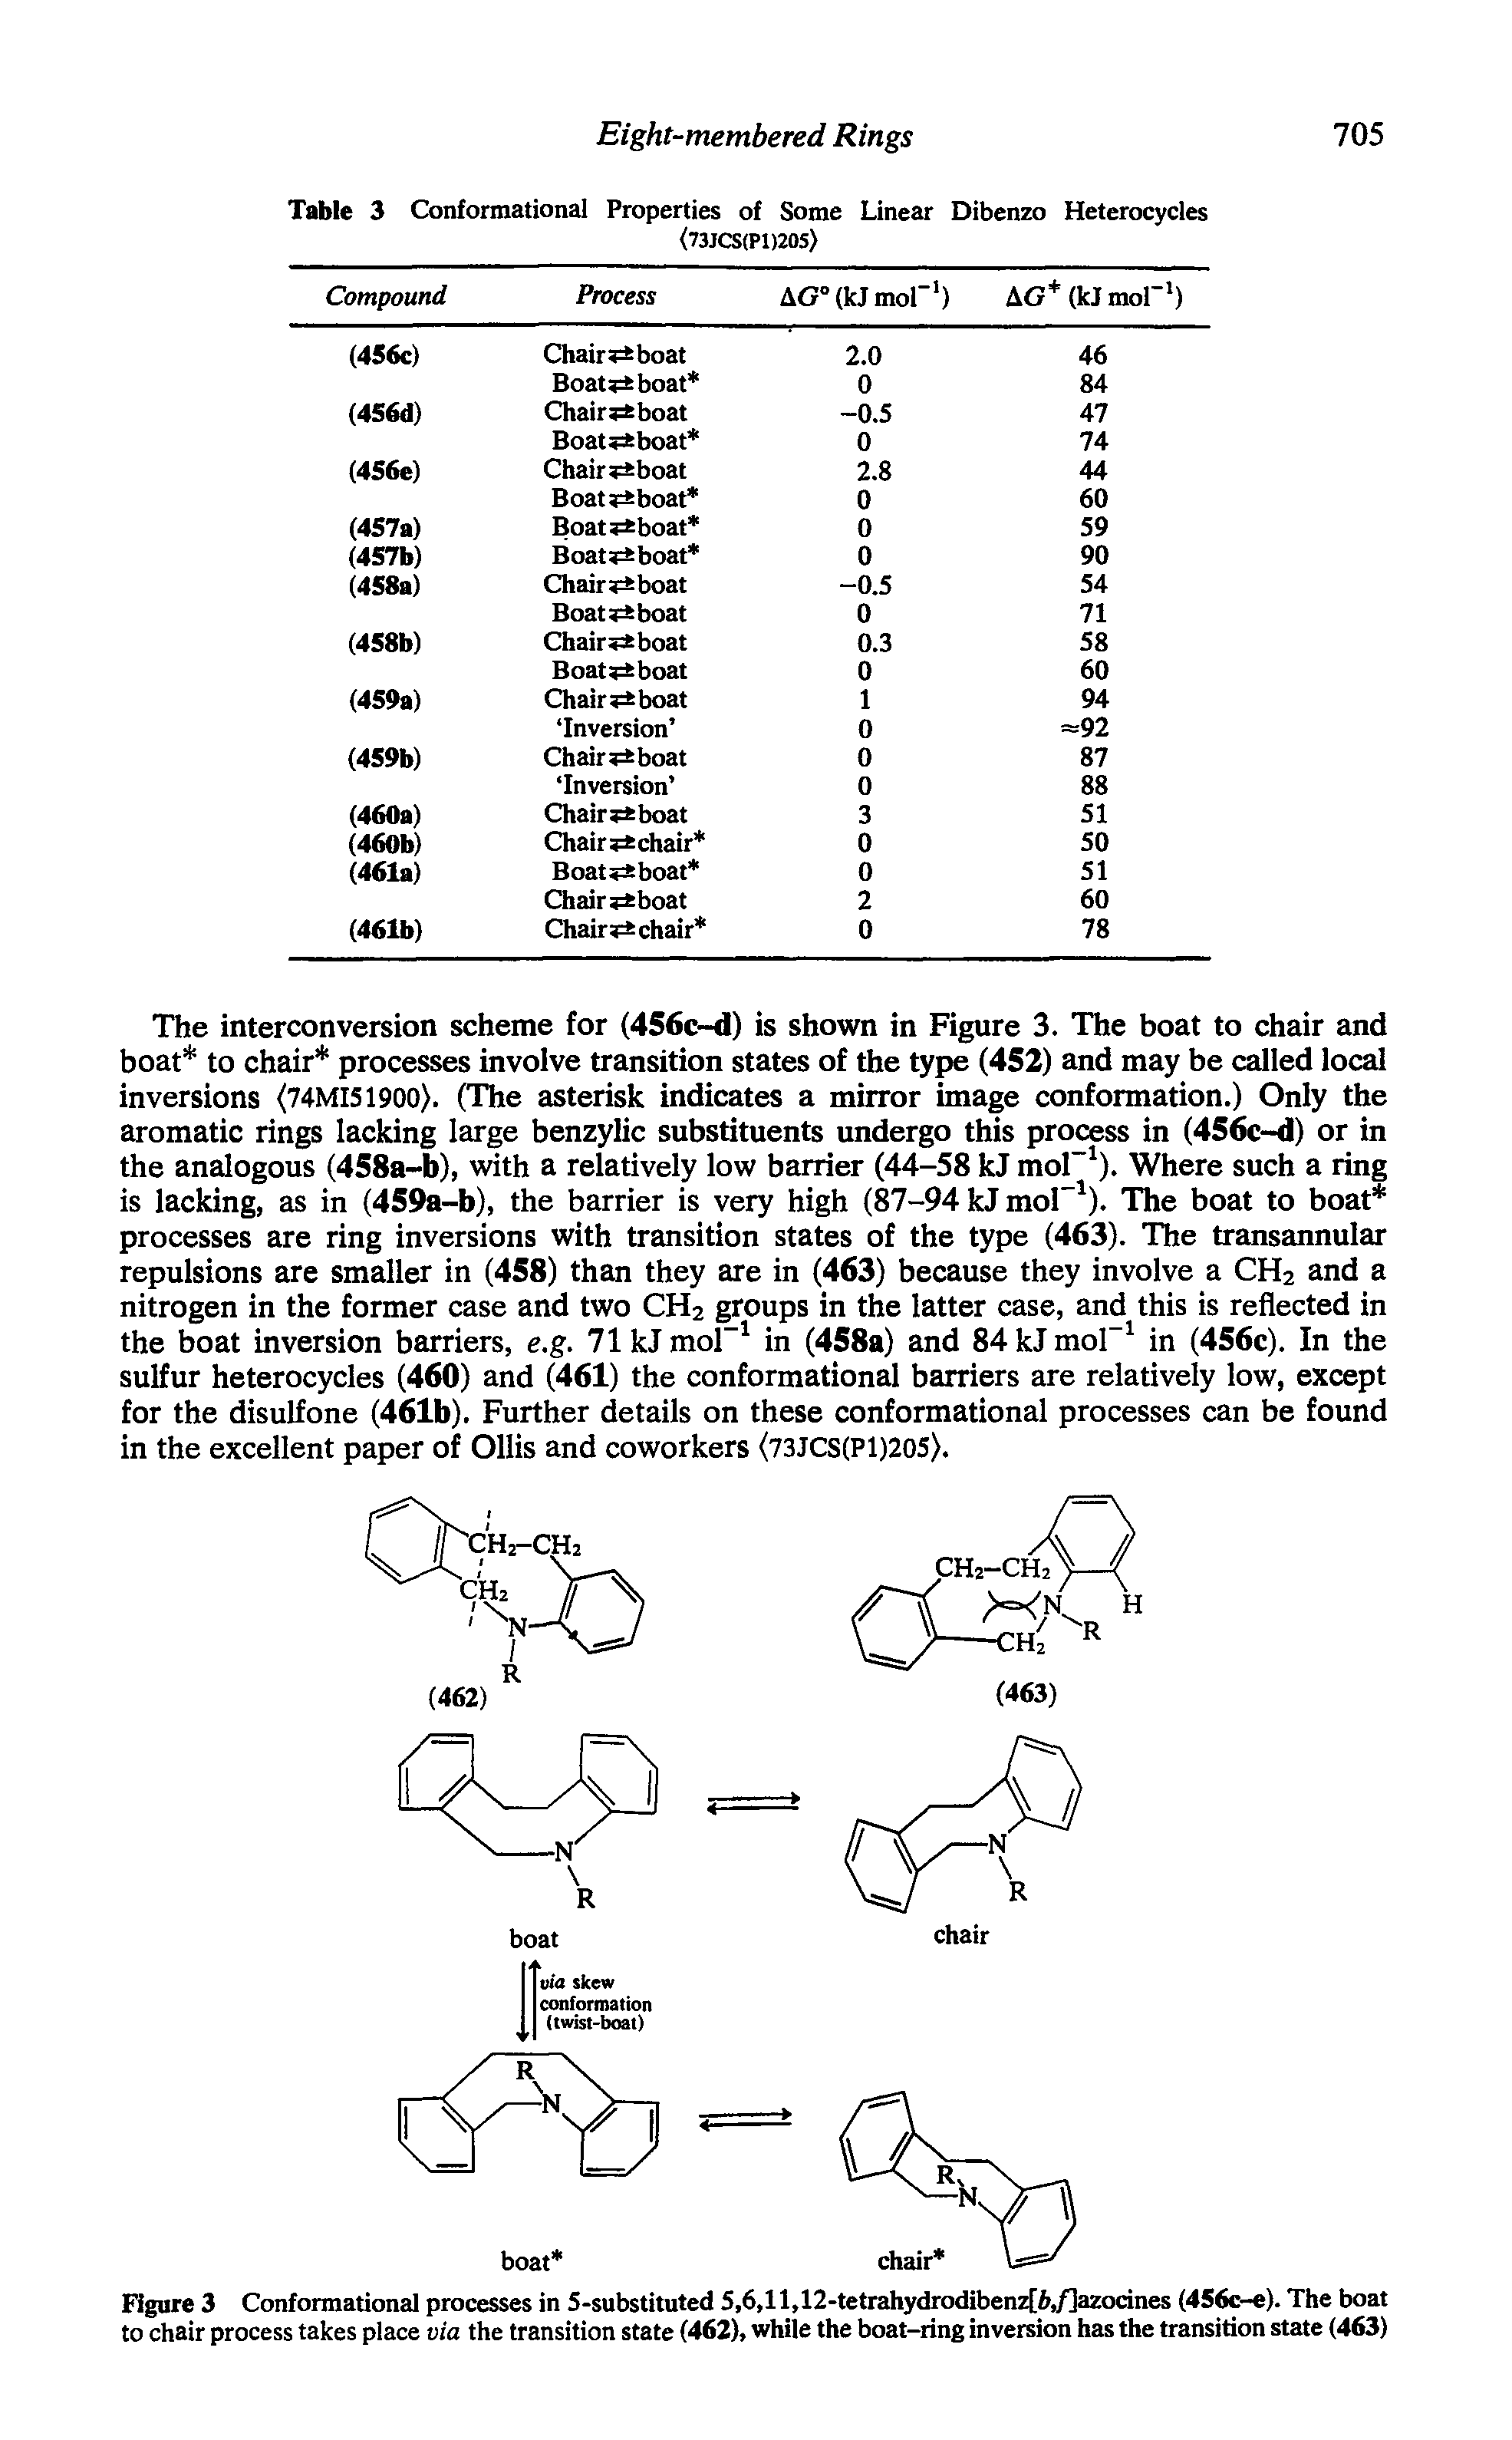 Figure 3 Conformational processes in 5-substituted 5,6,11,12-tetrahydrodibenz[6,/]azocines (456c-e). The boat to chair process takes place via the transition state (462), while the boat-ring inversion has the transition state (463)...